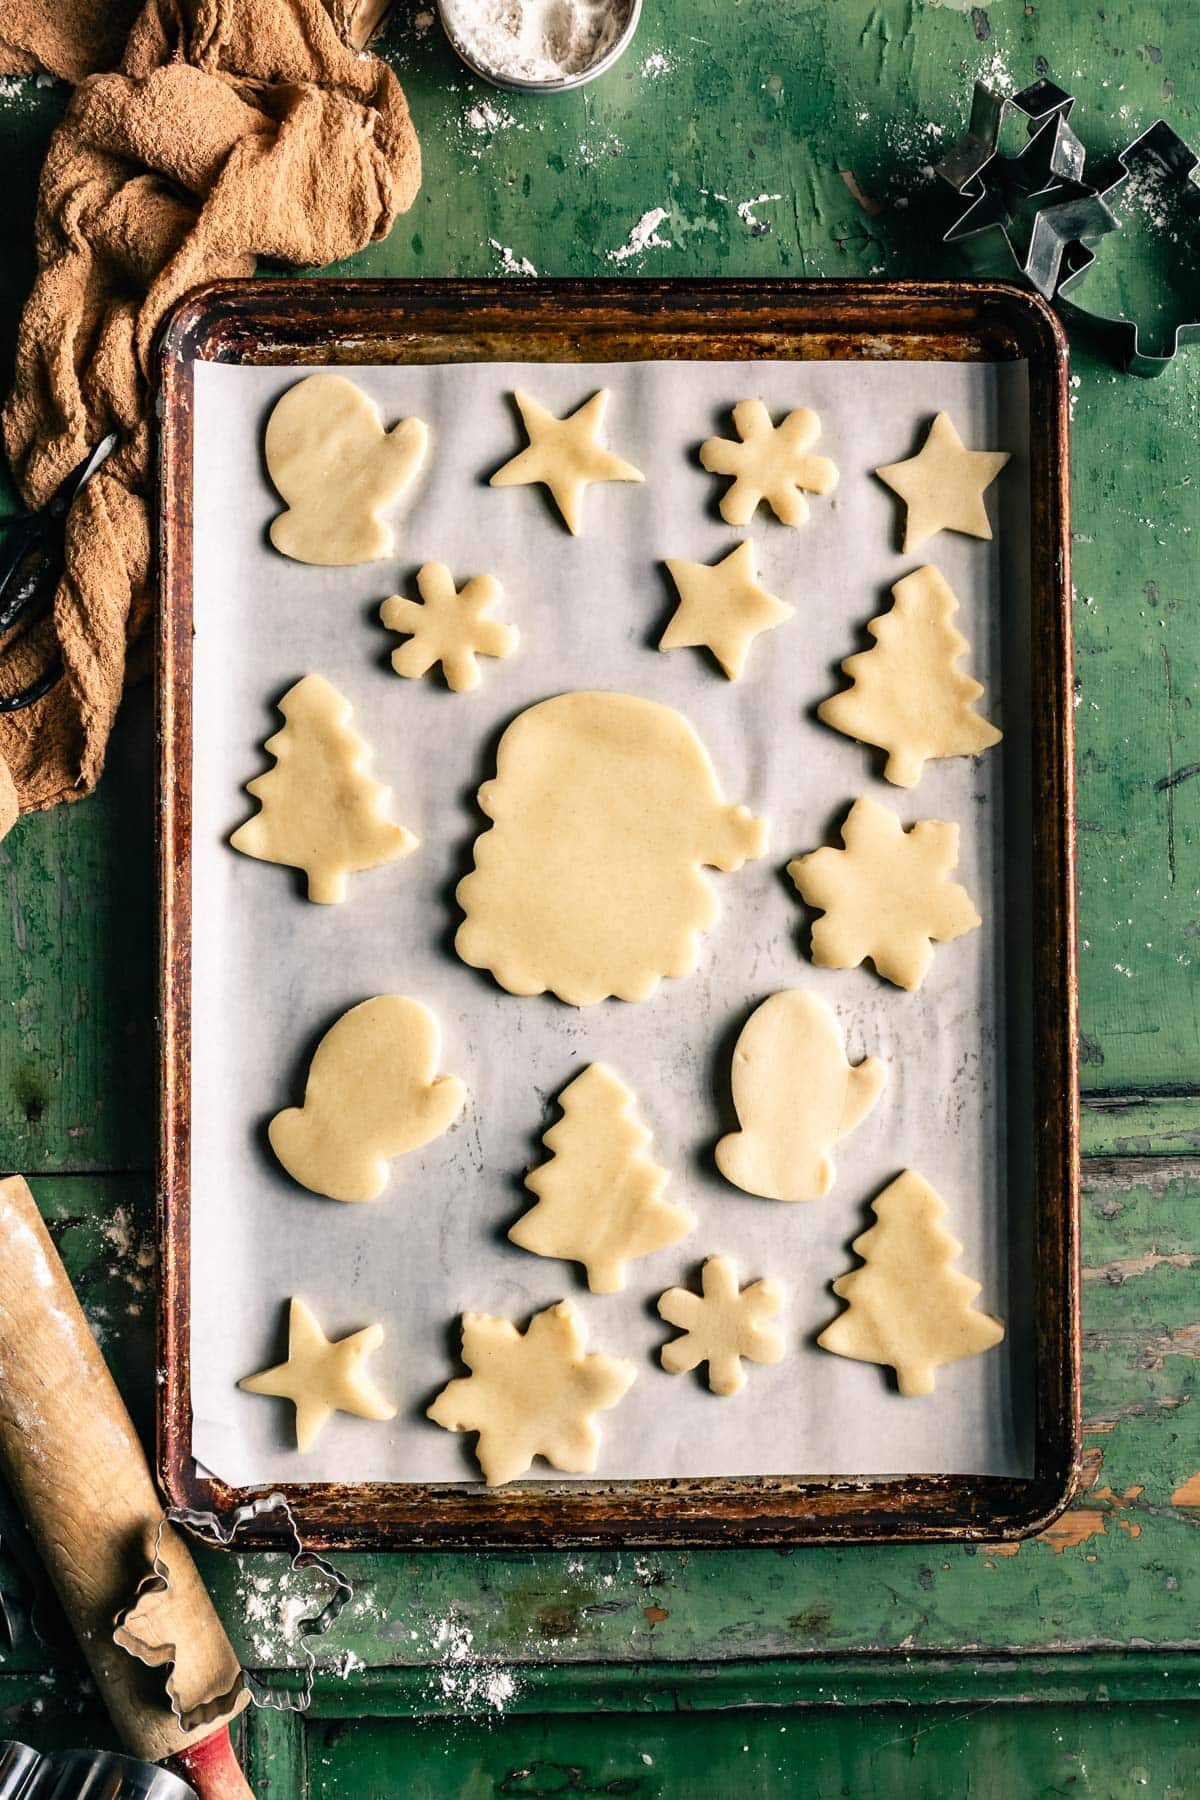 gluten free cookie dough cute into christmas shapes. On a baking sheet pan getting ready to be baked